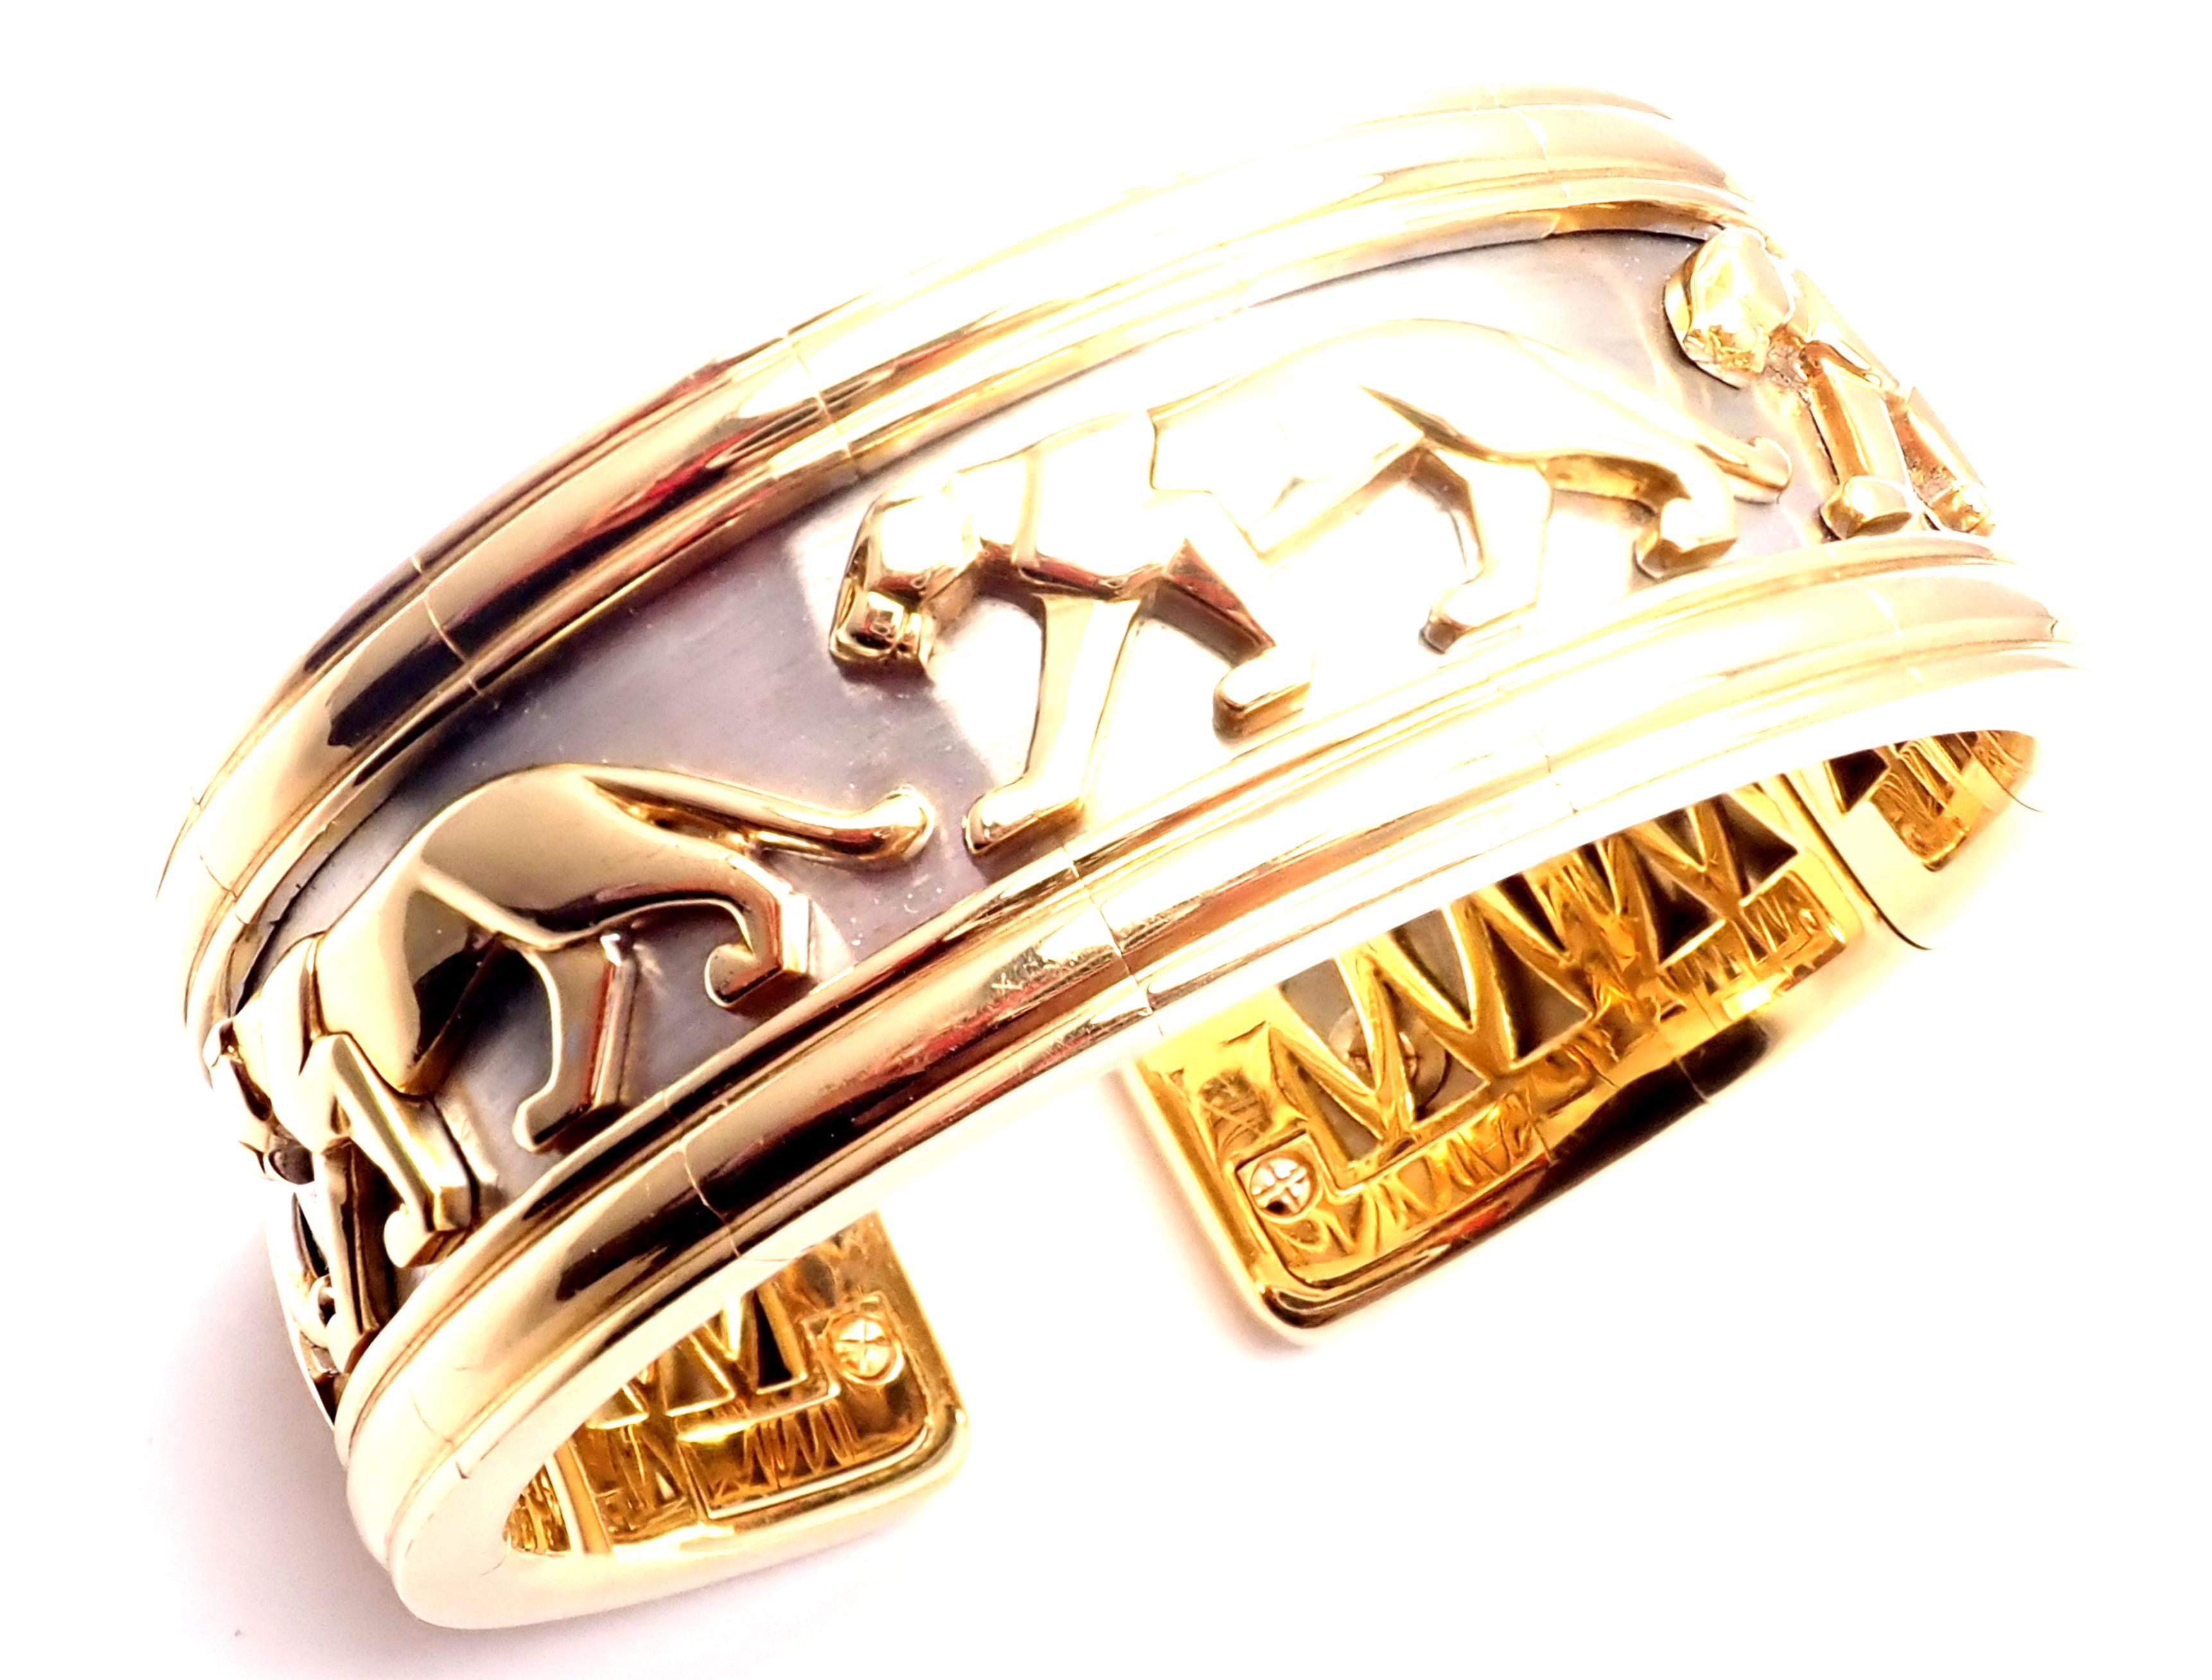 Women's or Men's Cartier Walking Panther Yellow and White Gold Cuff Bangle Bracelet